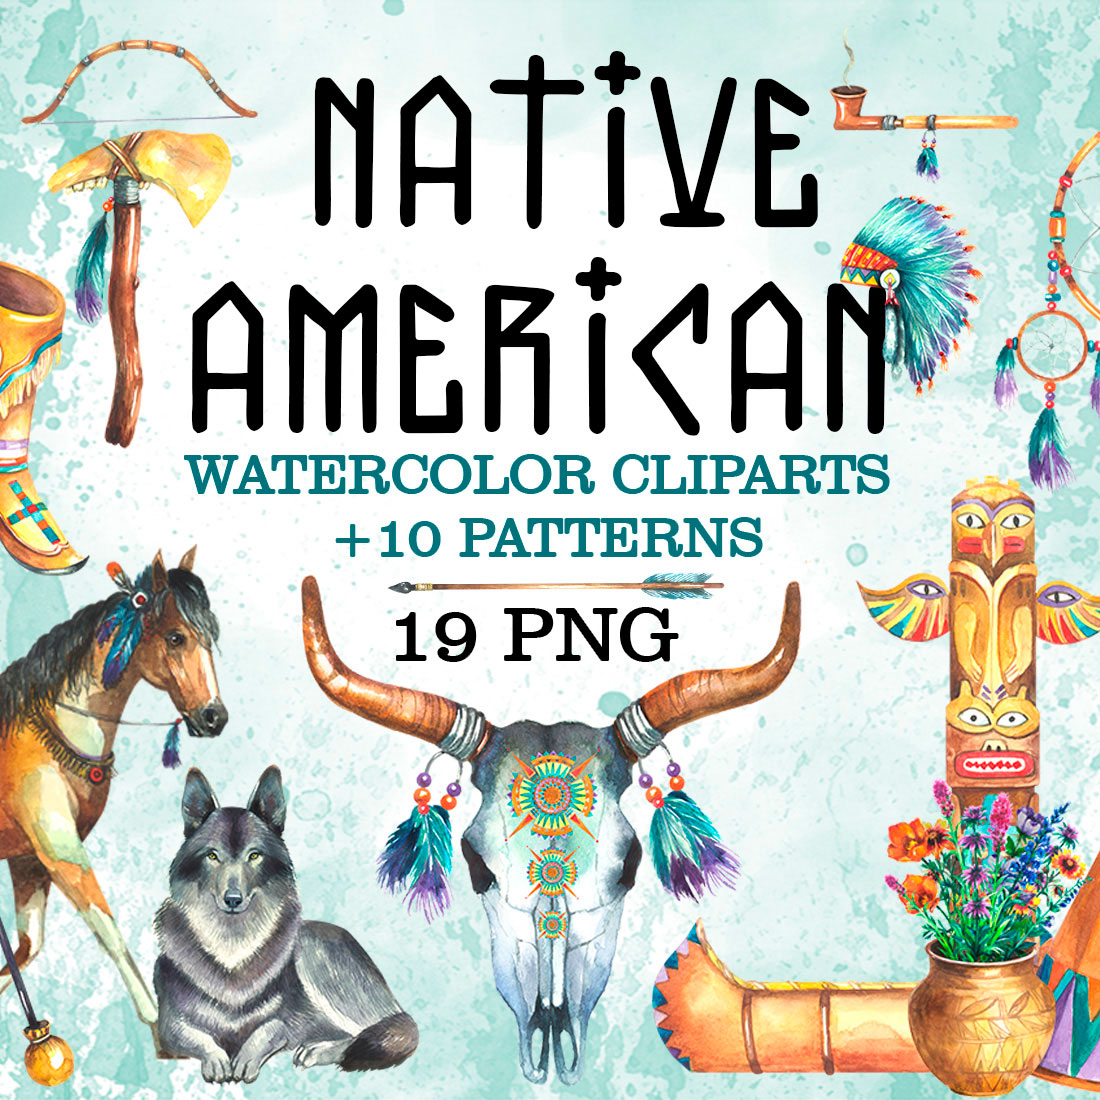 Native American Watercolor Clipart cover image.